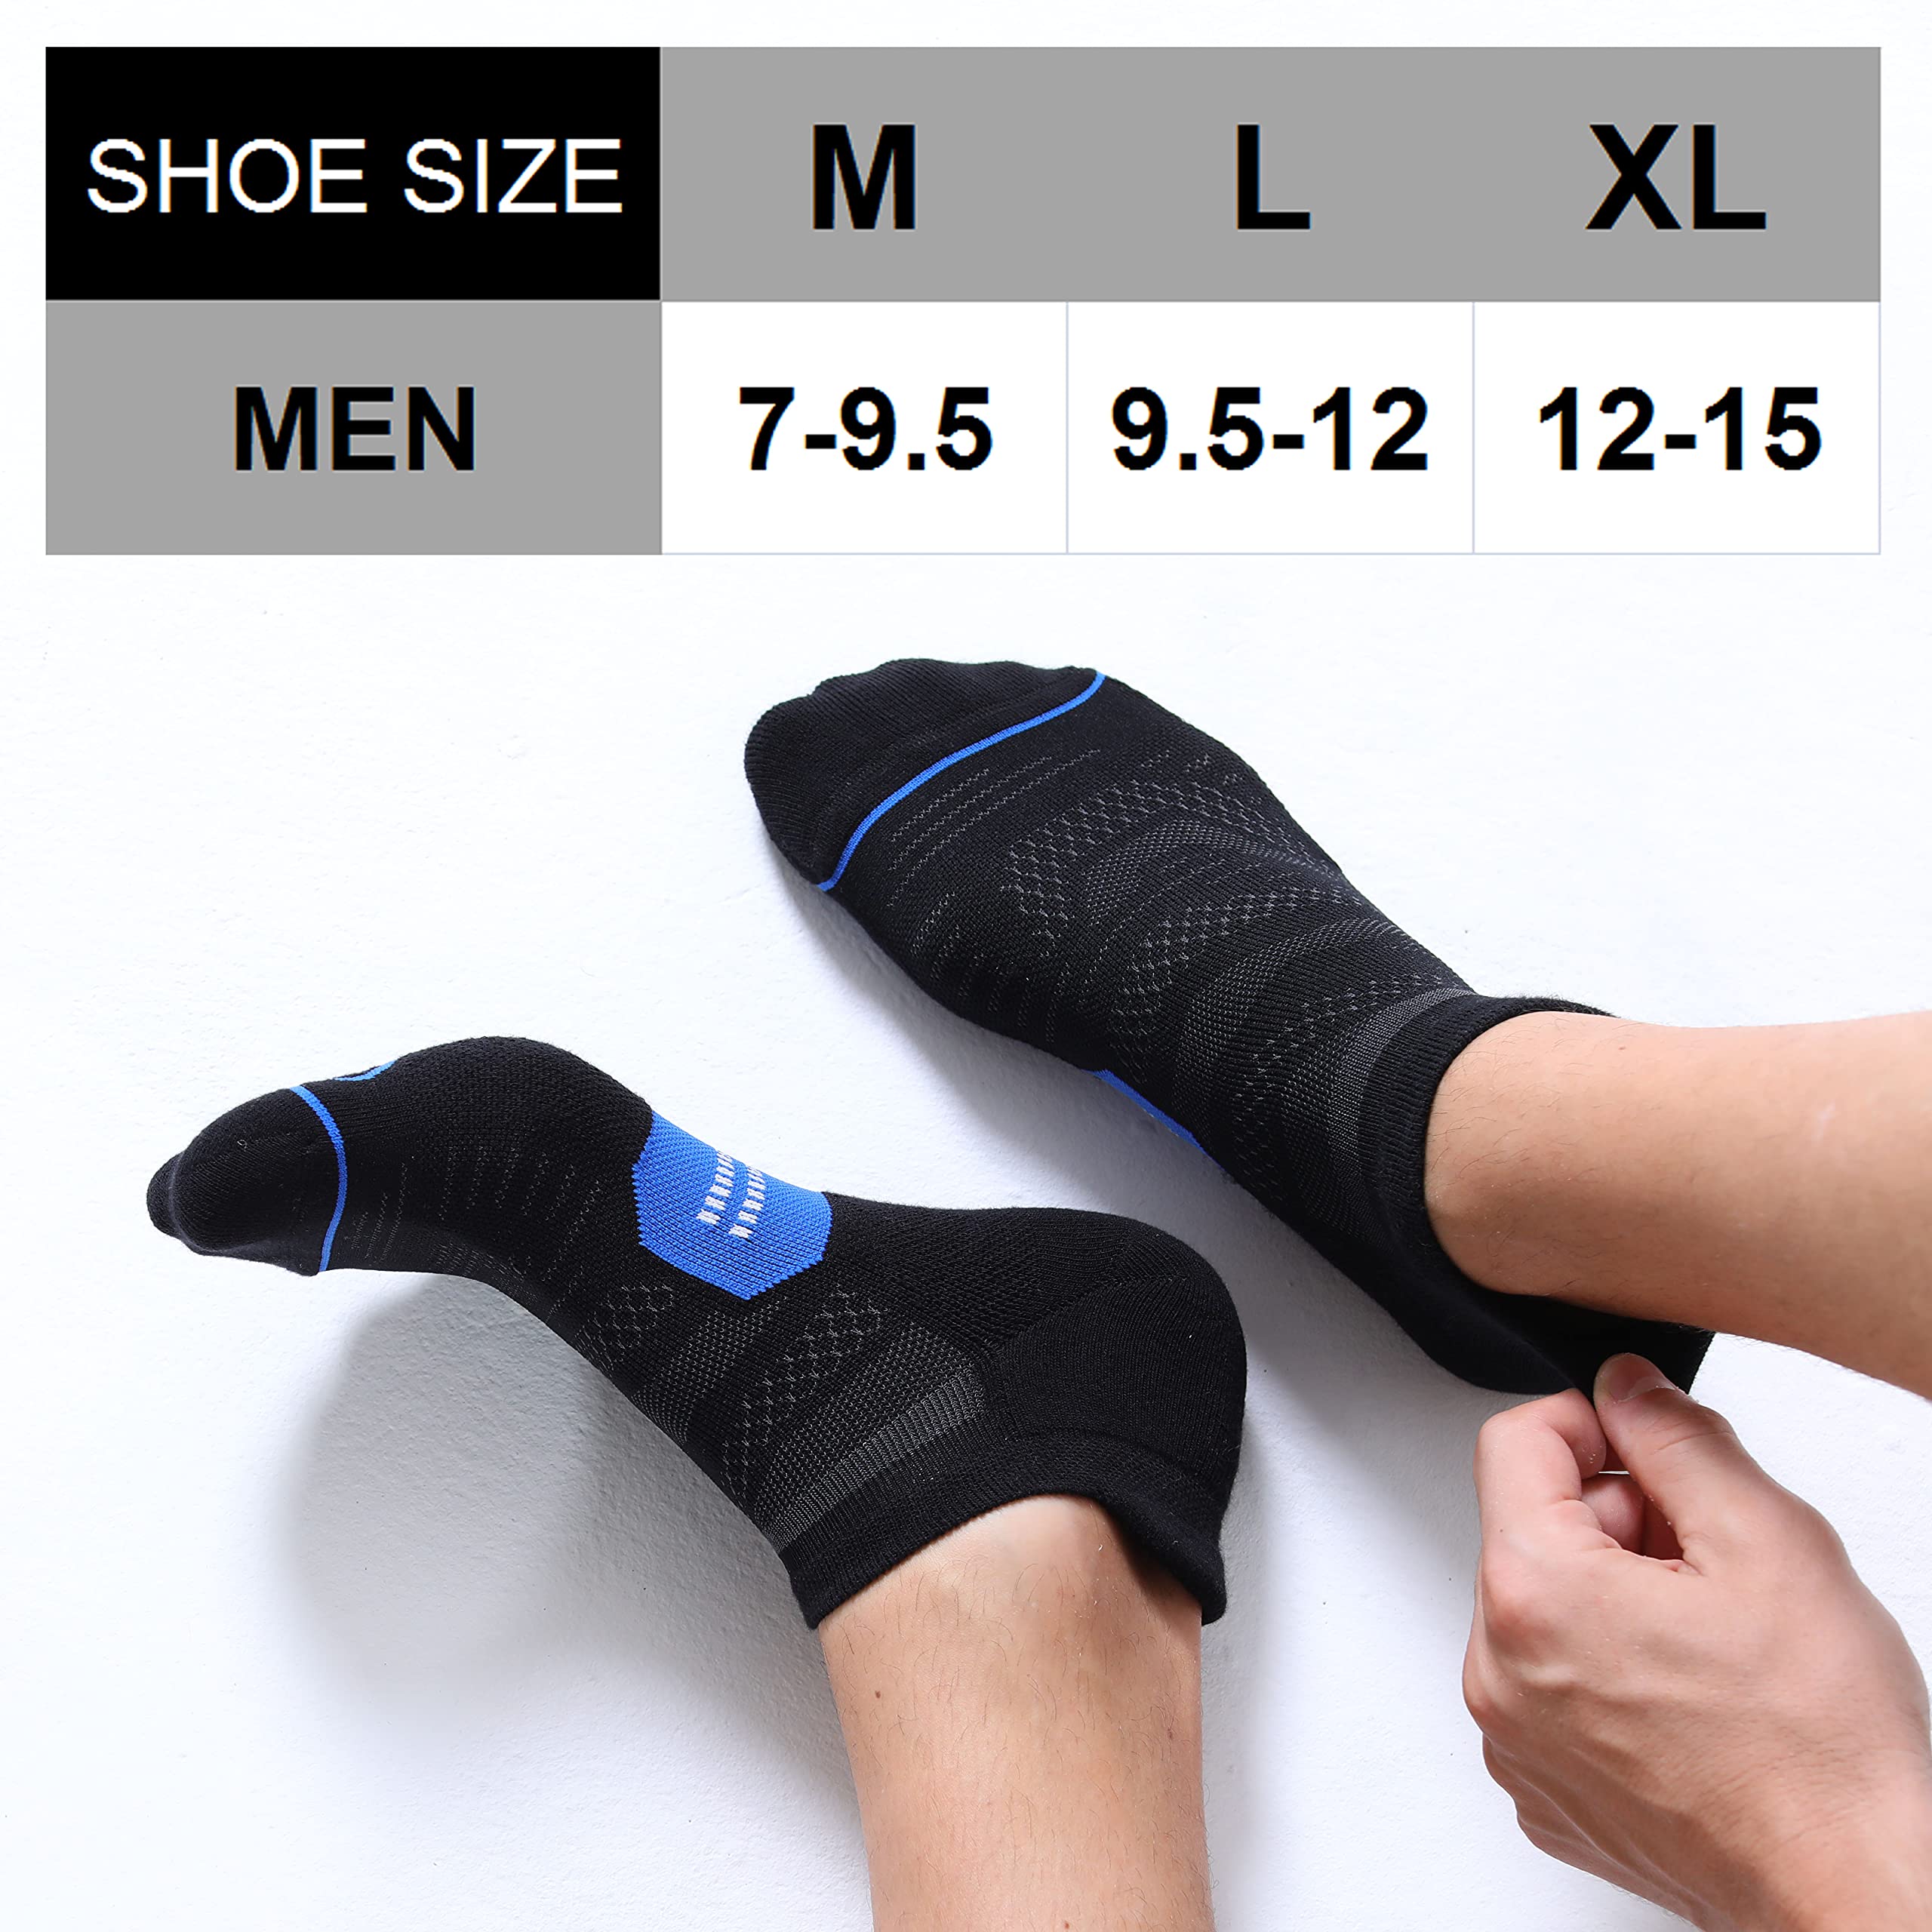 CelerSport 6 Pack Men's Running Ankle Socks with Cushion, Low Cut Athletic Sport Tab Socks, Mixed Black, Shoe Size: 12-15